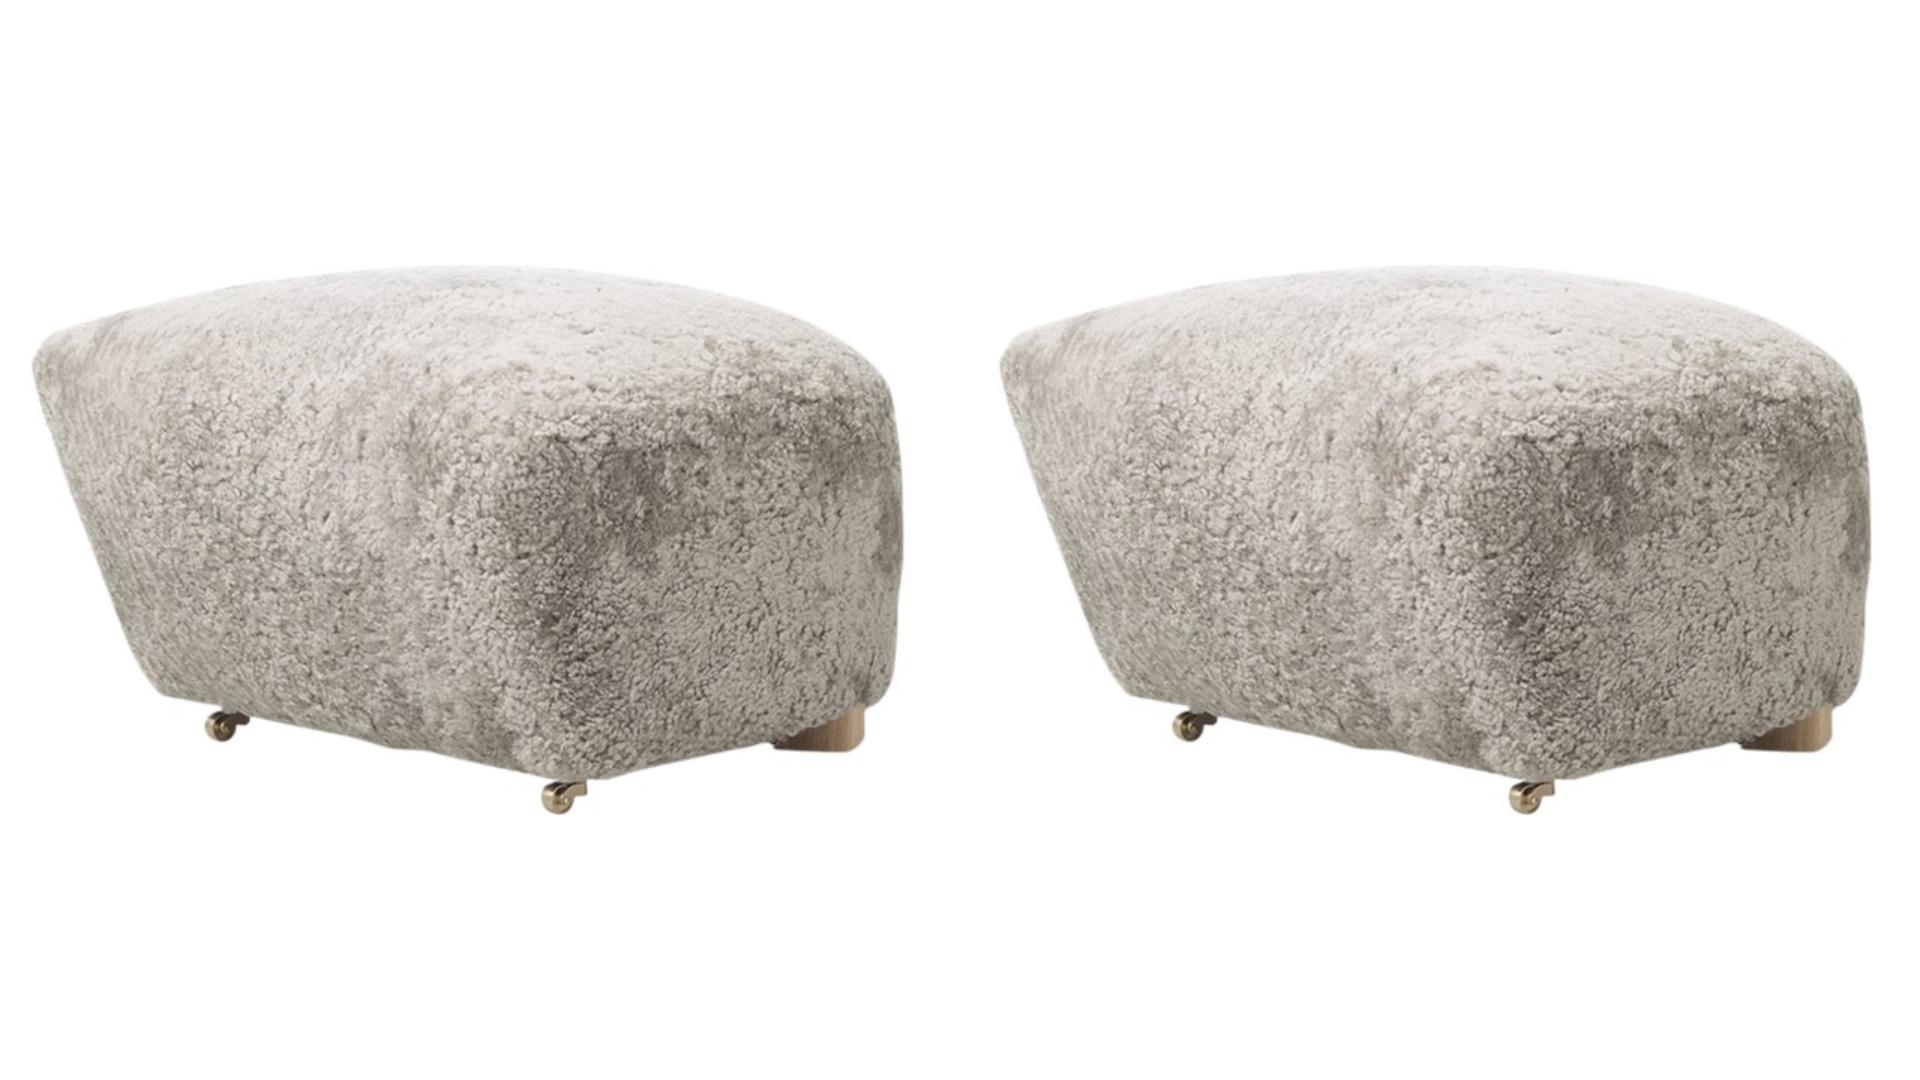 Set of 2 green tea natural oak sheepskin the tired man footstools by Lassen
Dimensions: W 55 x D 53 x H 36 cm 
Materials: Sheepskin

Flemming Lassen designed the overstuffed easy chair, The Tired Man, for The Copenhagen Cabinetmakers’ Guild